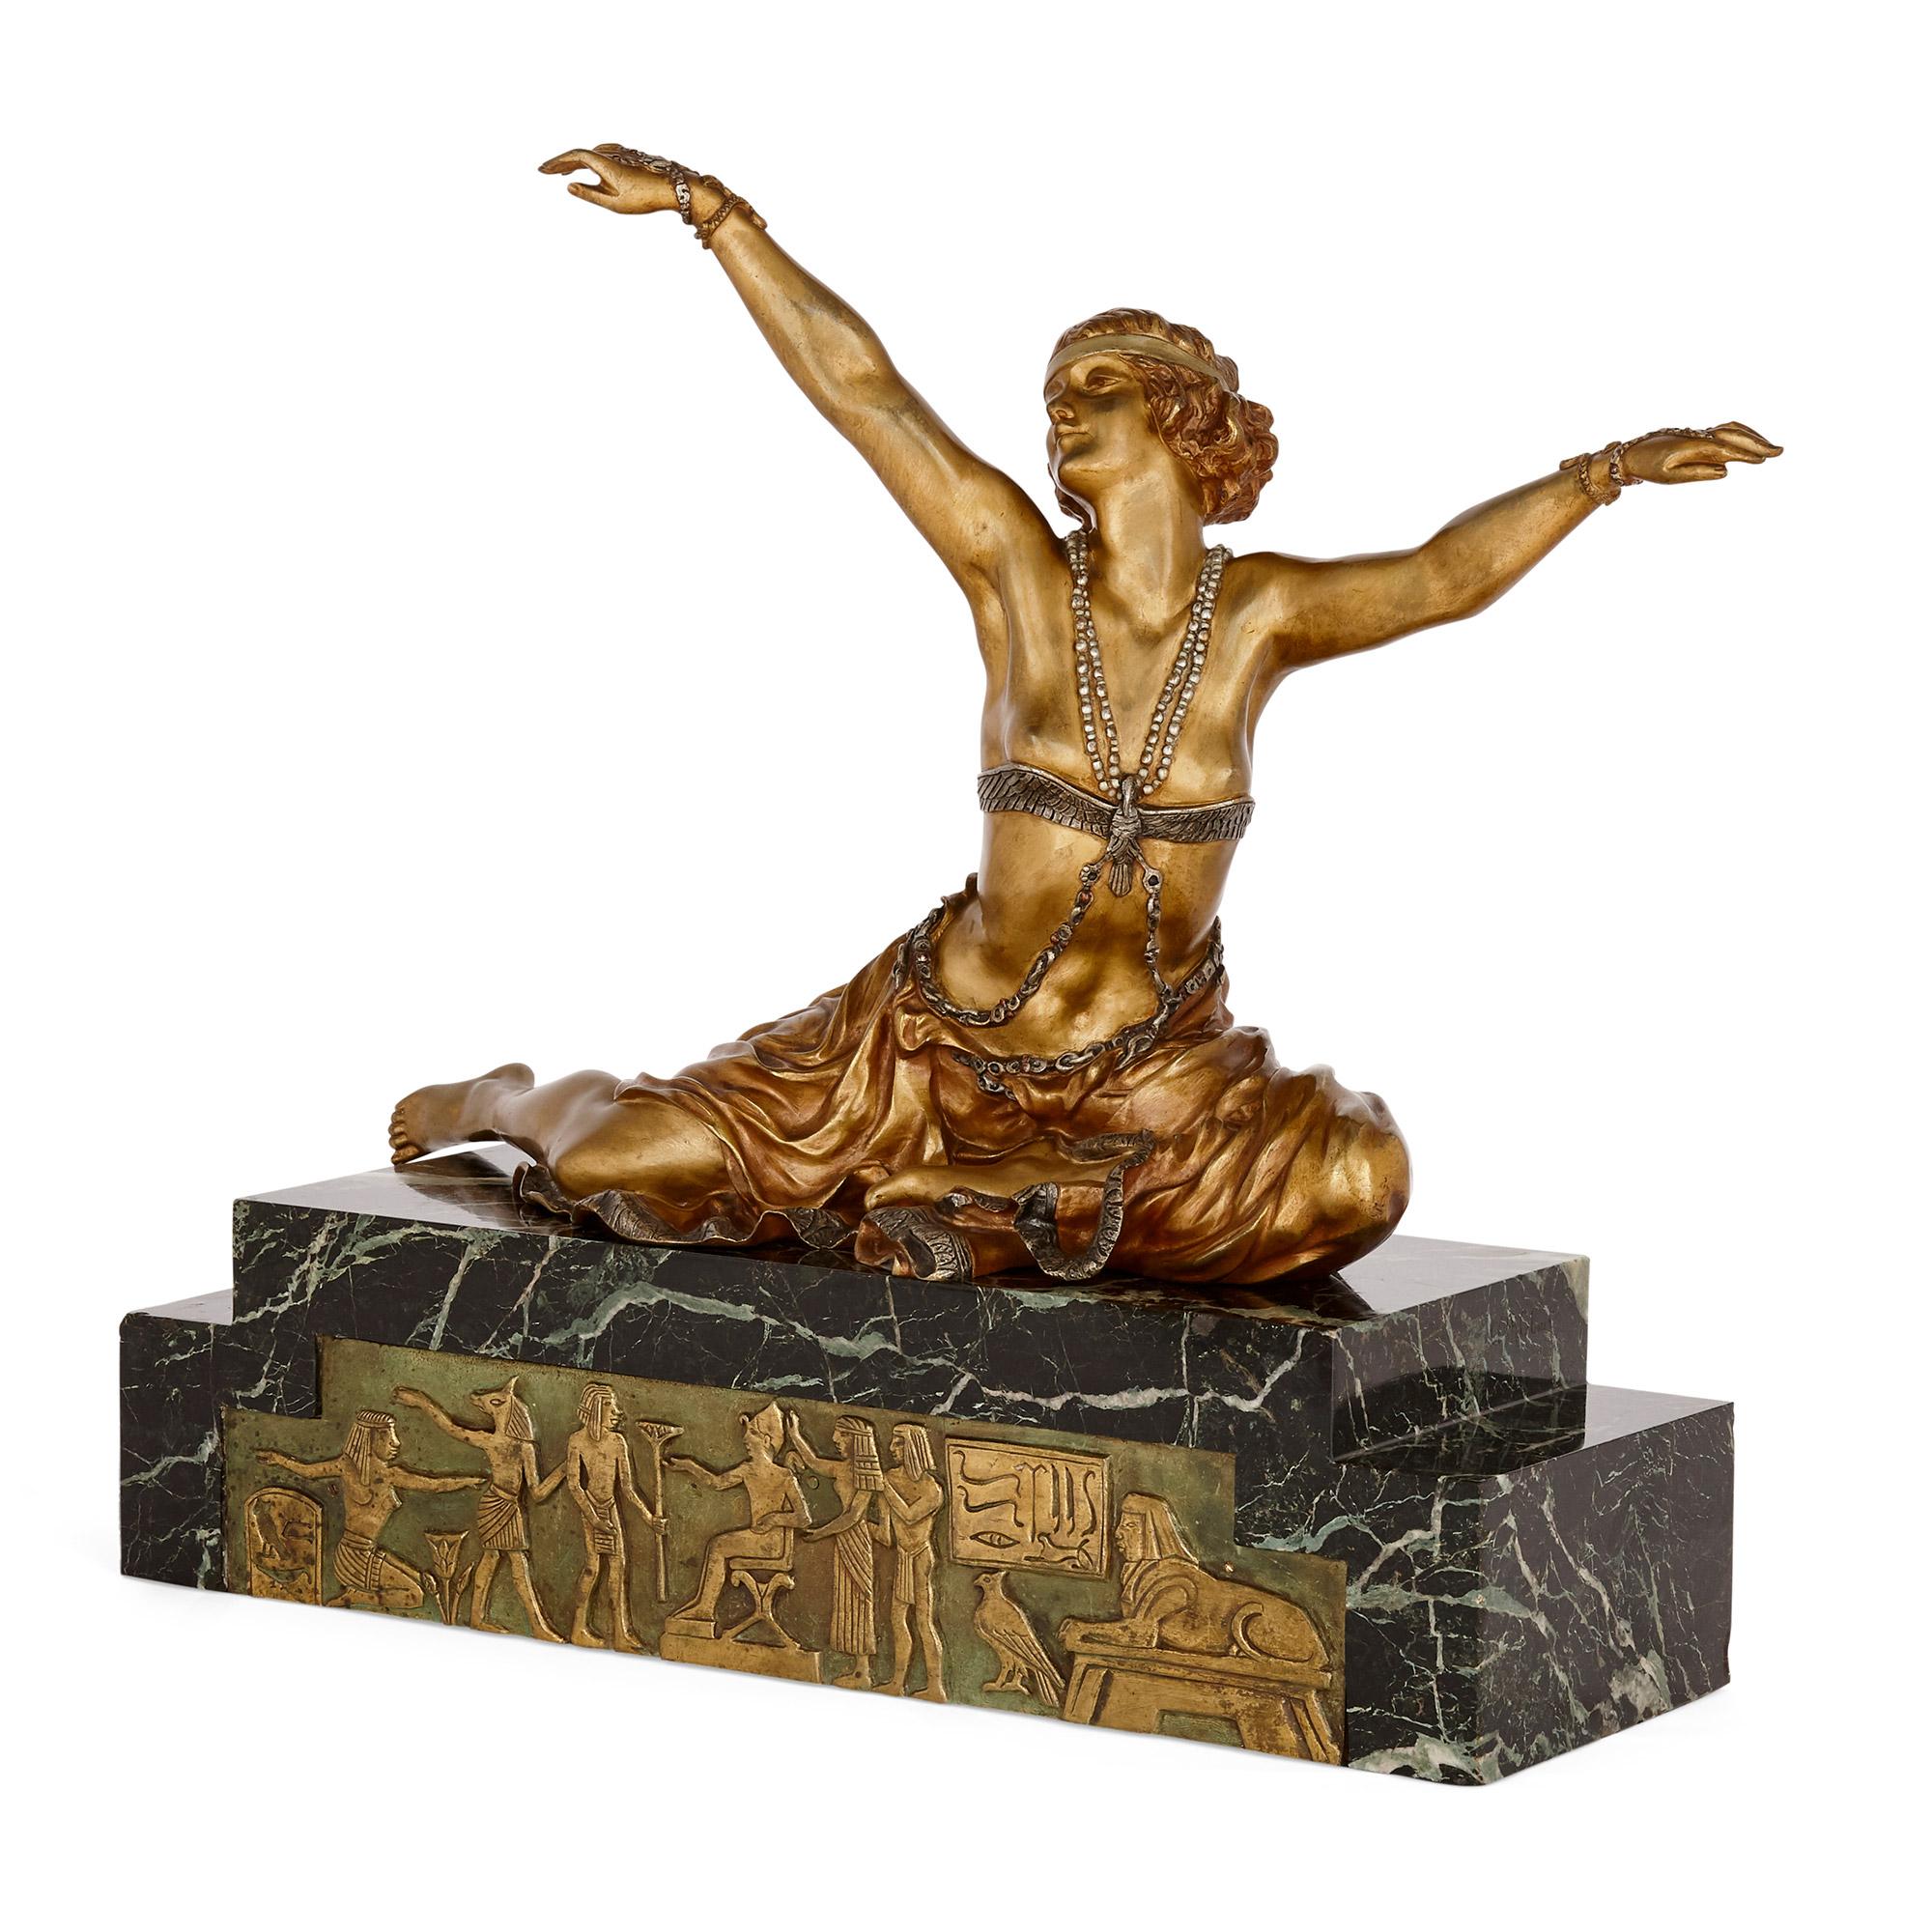 Art Deco gilt bronze sculpture of the 'Theban Dancer' by CJR Colinet
French, circa 1925
Measures: Height 55cm, width 59cm, depth 23cm

The important French female sculptor Claire Jeanne Roberte Colinet, beautifully made this Art Deco model using